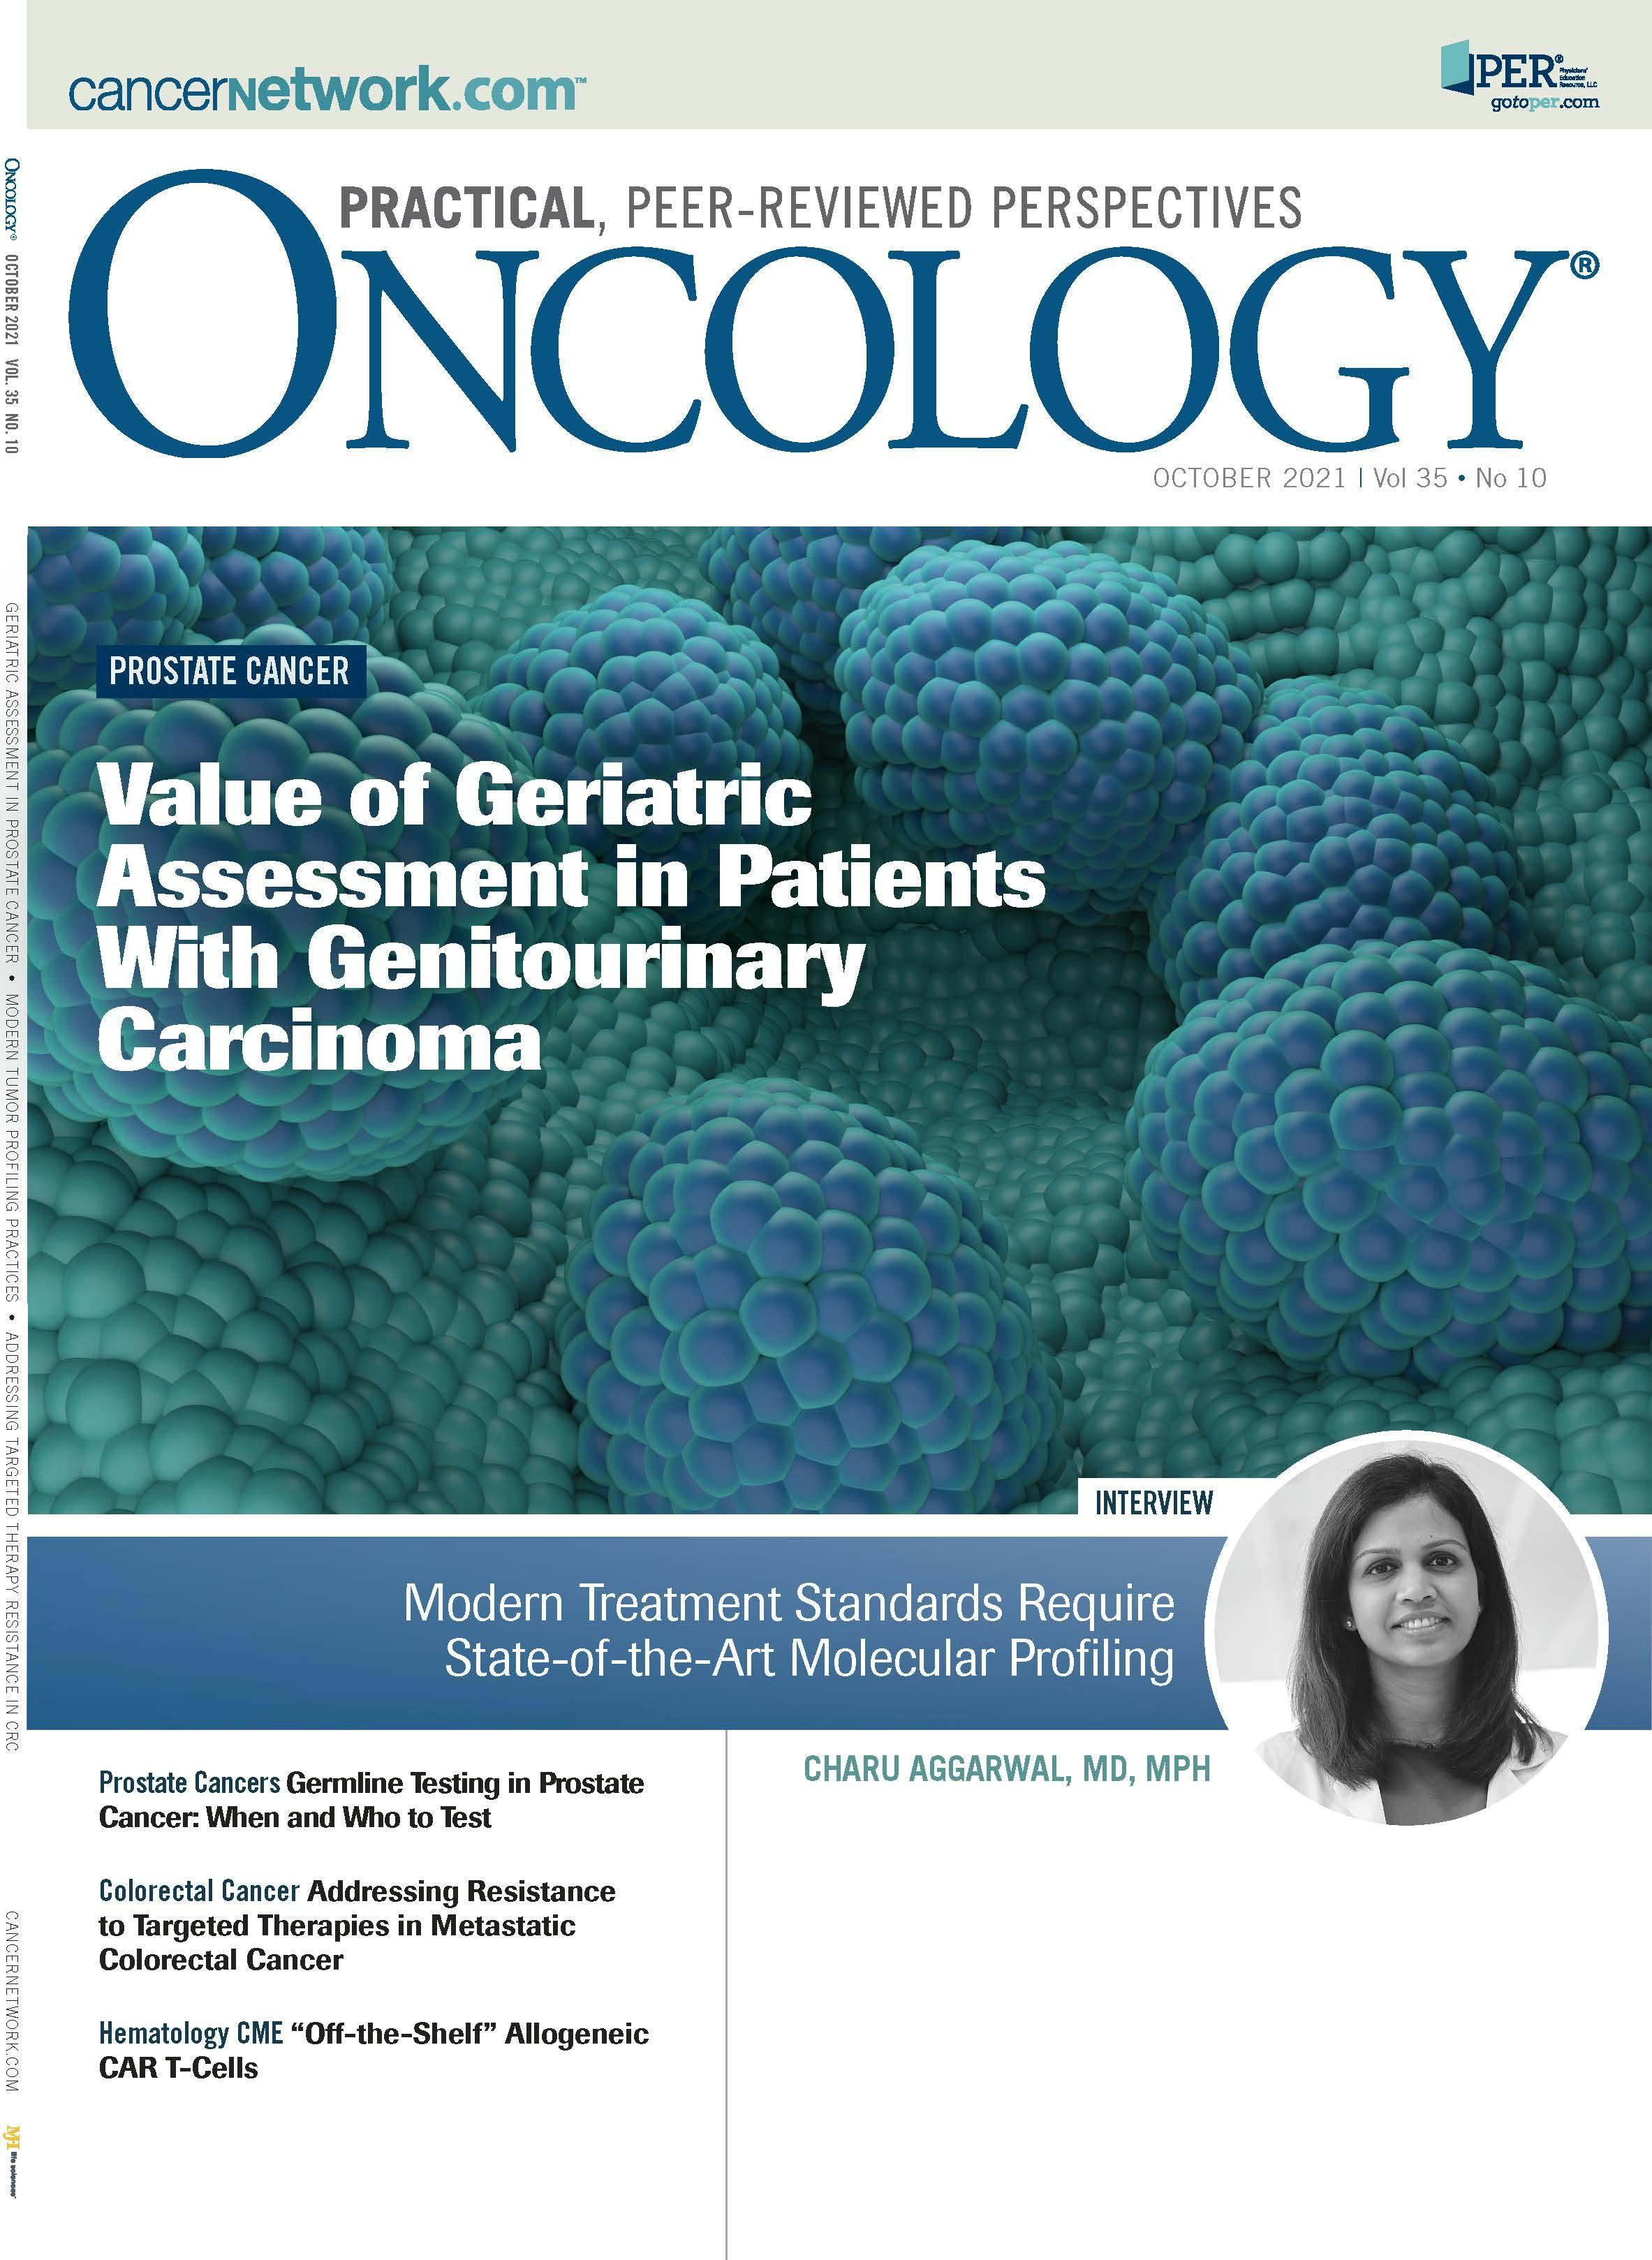 ONCOLOGY Vol 35, Issue 10